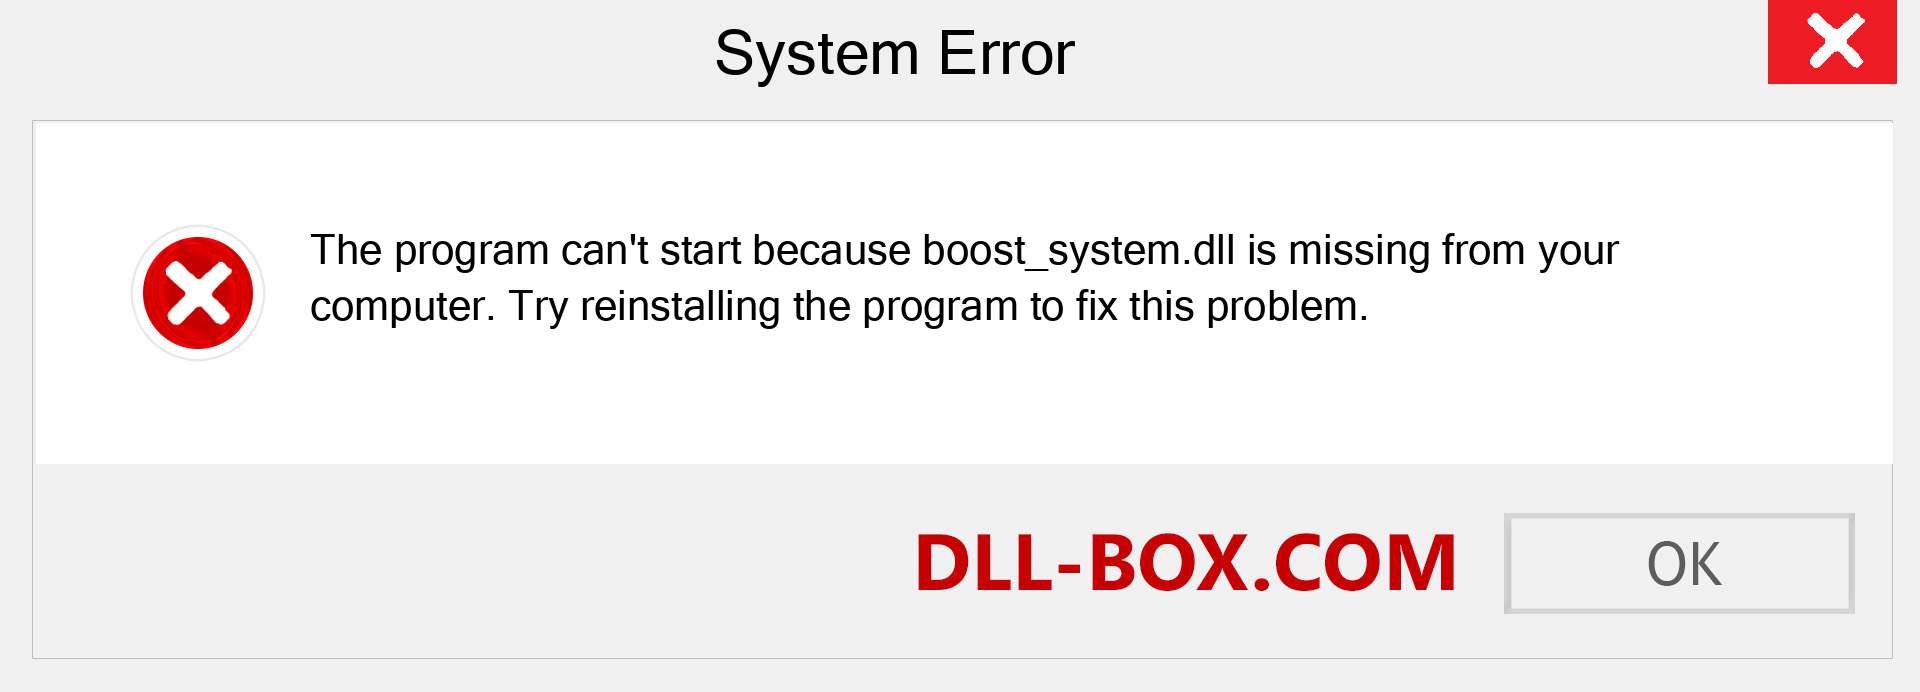  boost_system.dll file is missing?. Download for Windows 7, 8, 10 - Fix  boost_system dll Missing Error on Windows, photos, images